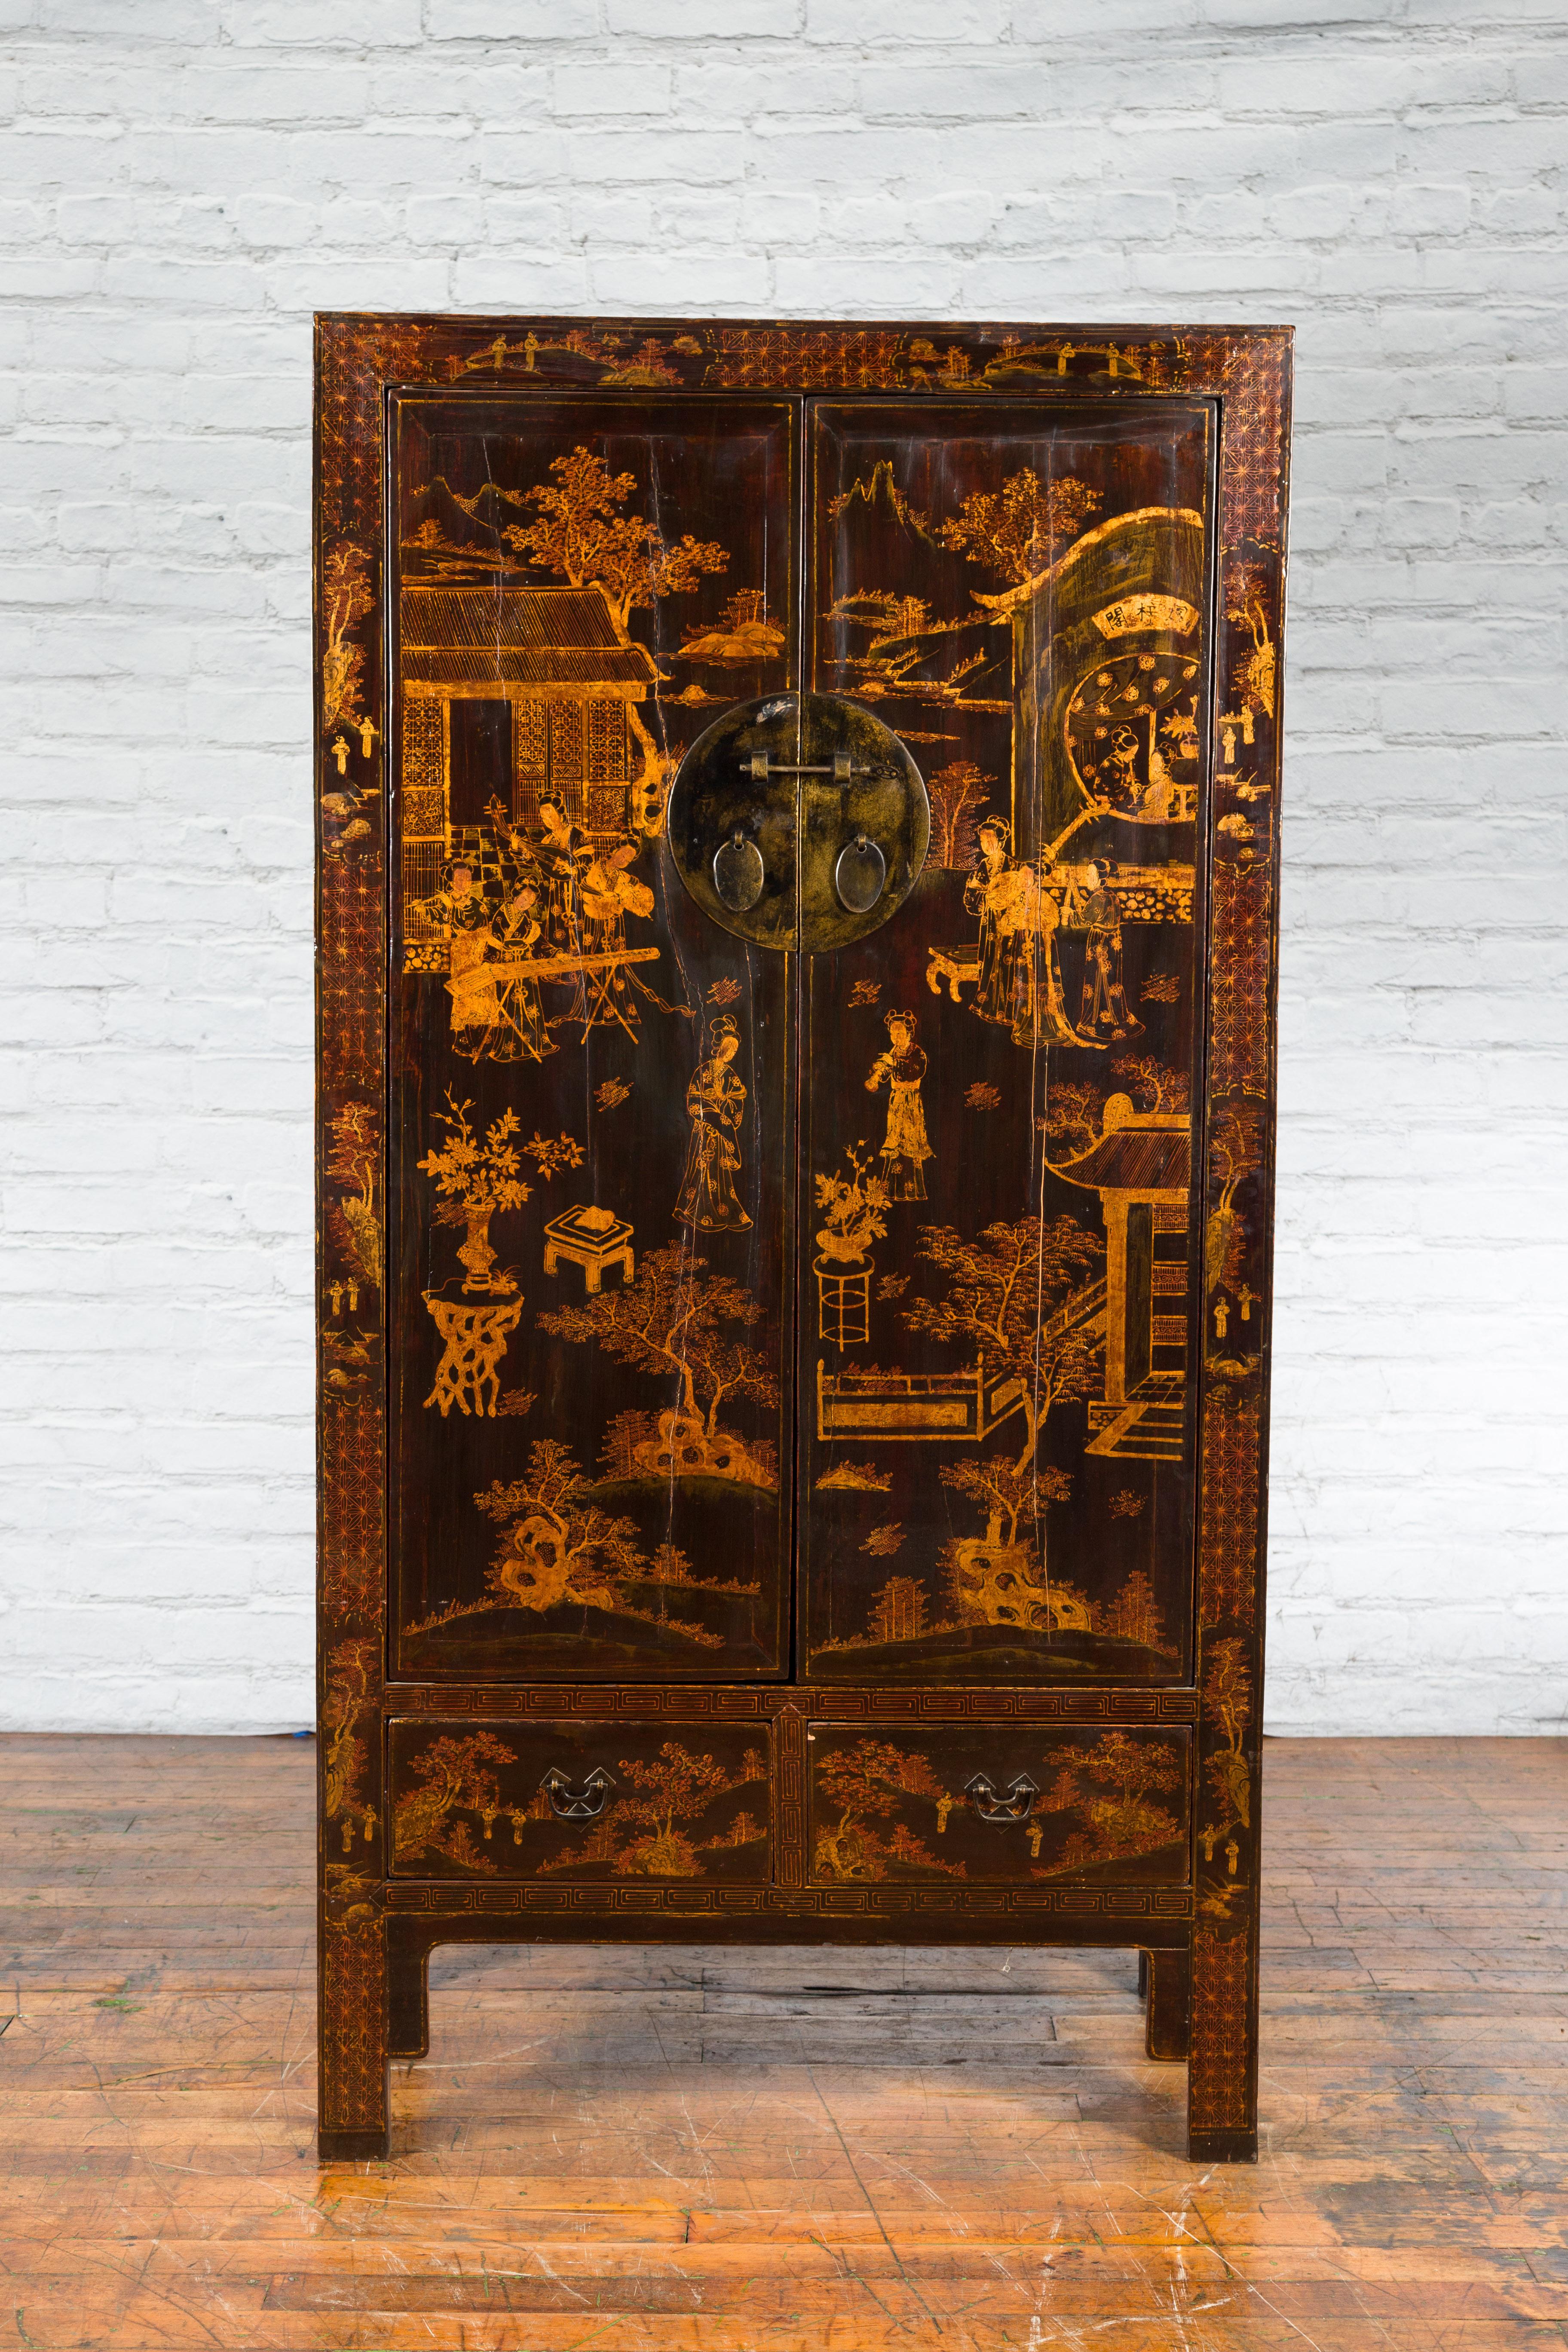 A Chinese Qing Dynasty period dark brown lacquered armoire from the 19th century with gilt hand-painted décor, bronze medallion hardware, inner shelves and hidden drawers. Created in China during the Qing Dynasty in the 19th century, this tall